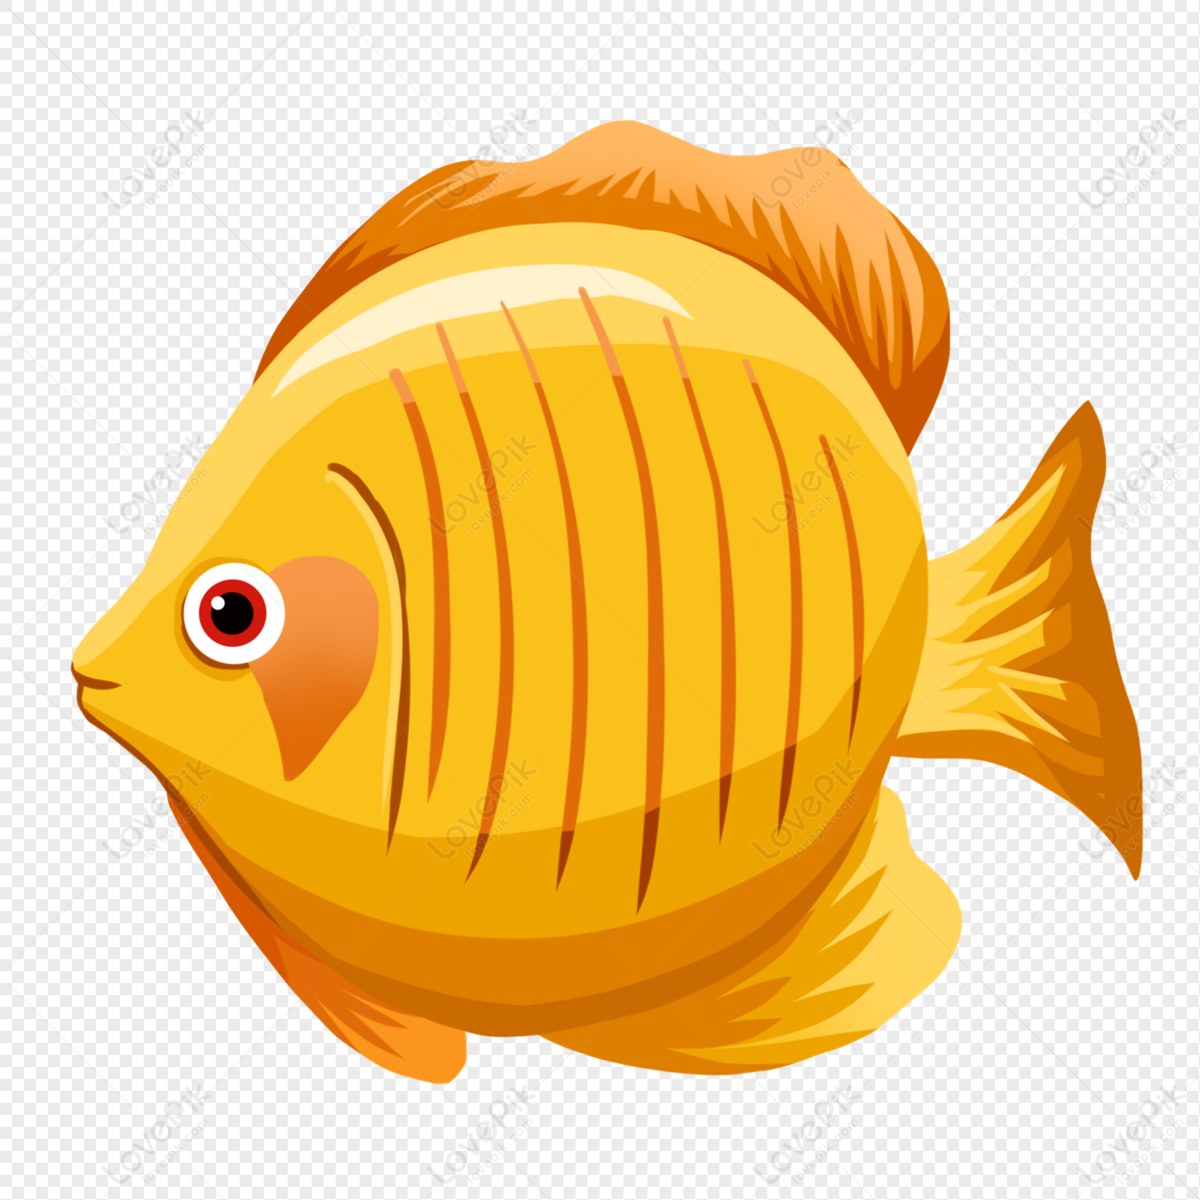 Cute Cartoon Fish PNG Transparent Background And Clipart Image For Free  Download - Lovepik | 401443630